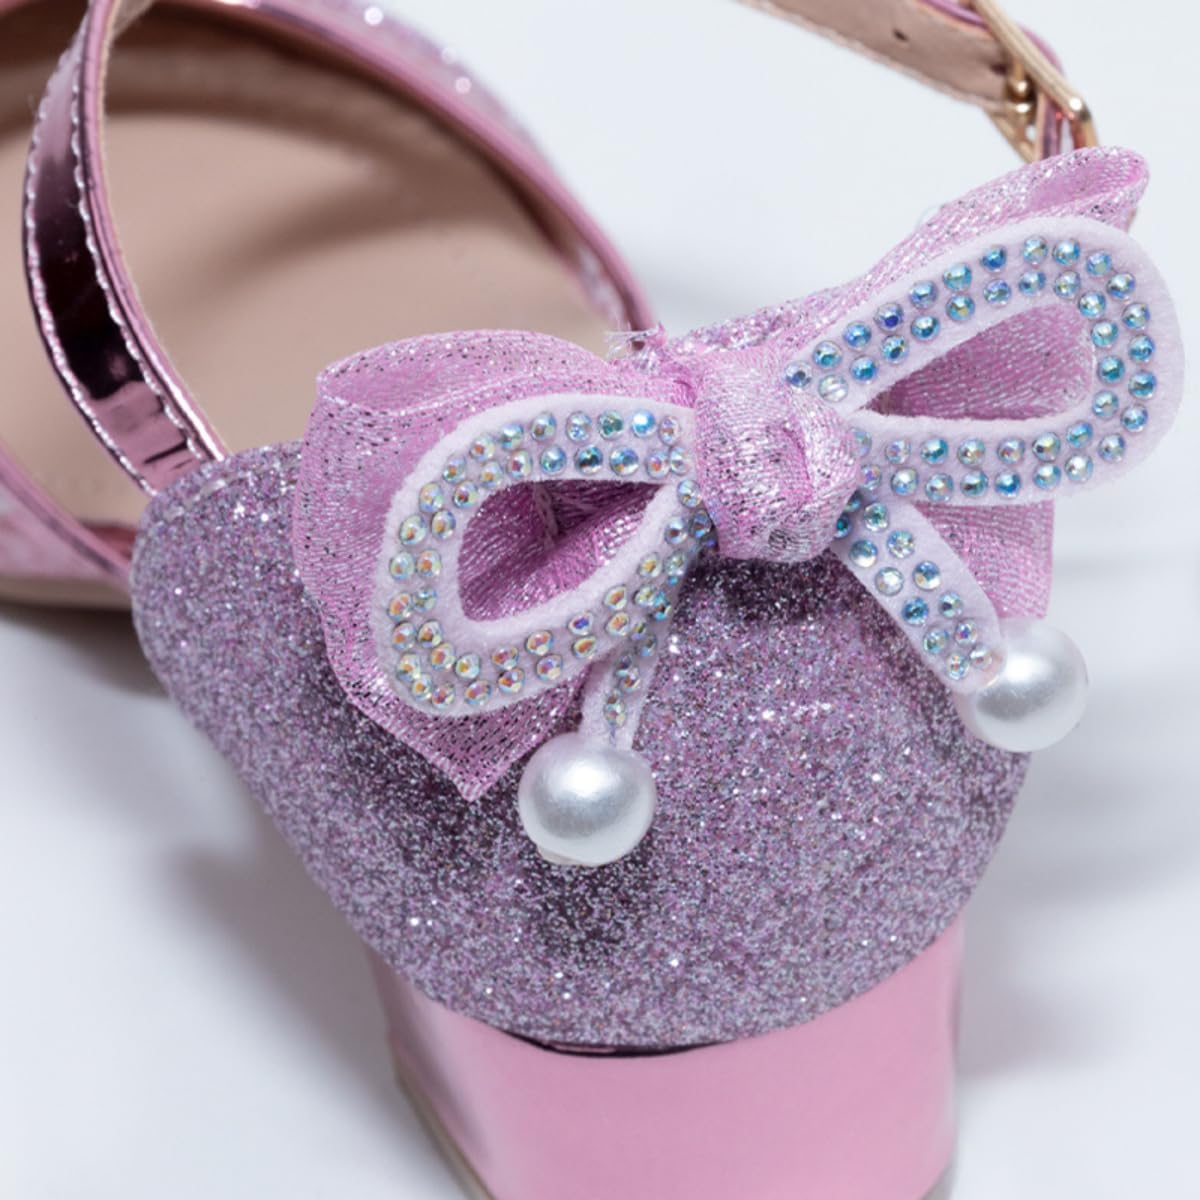 Girl's Mary Jane Shoes Low Heels and Glitter